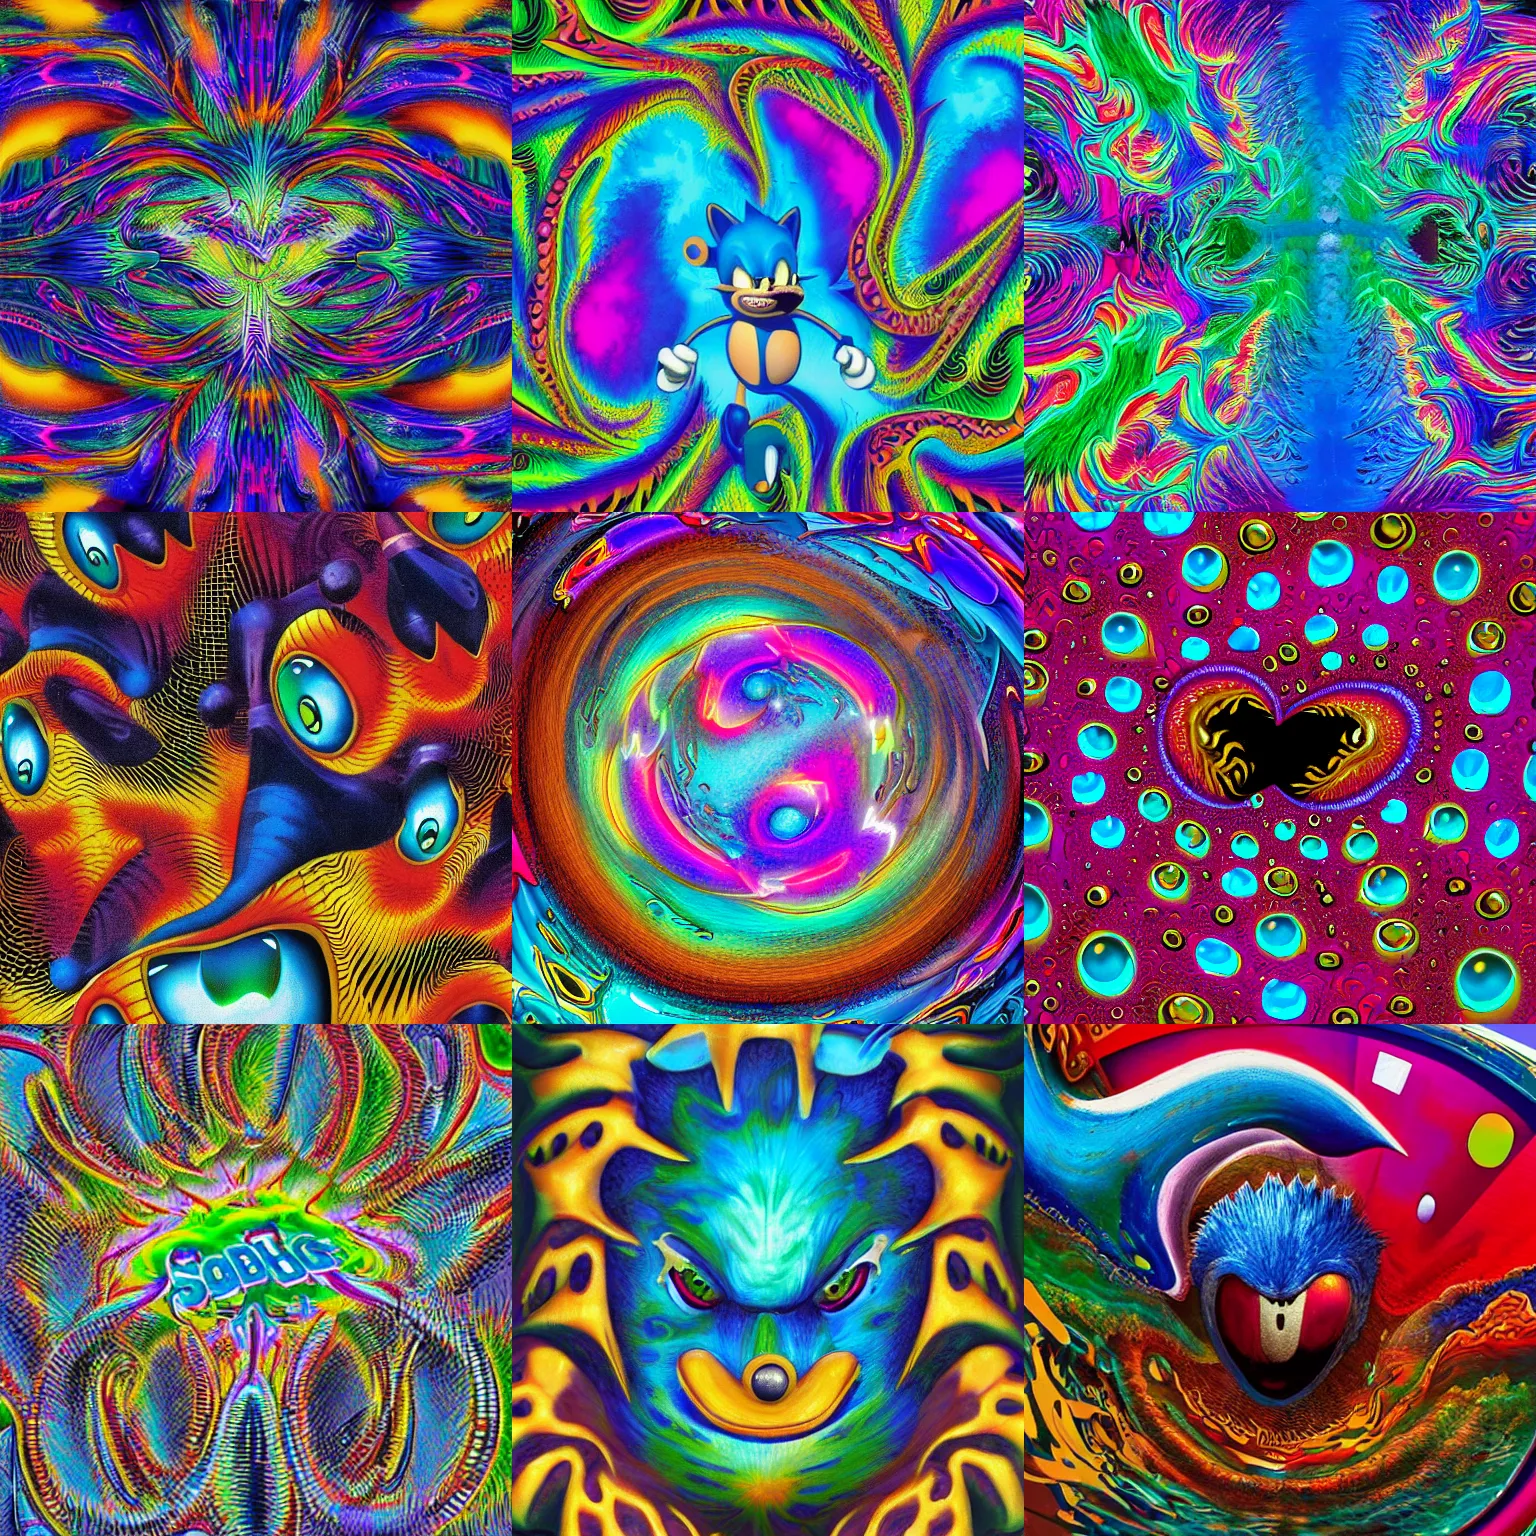 Prompt: closeup portrait of a surreal, sharp, detailed professional, high quality airbrush art sonic the hedgehog mgmt album cover of a liquid dissolving lsd dmt surfing through cyberspace, mandelbrot pattern, 1 9 9 0 s 1 9 9 2 sega genesis video game album cover